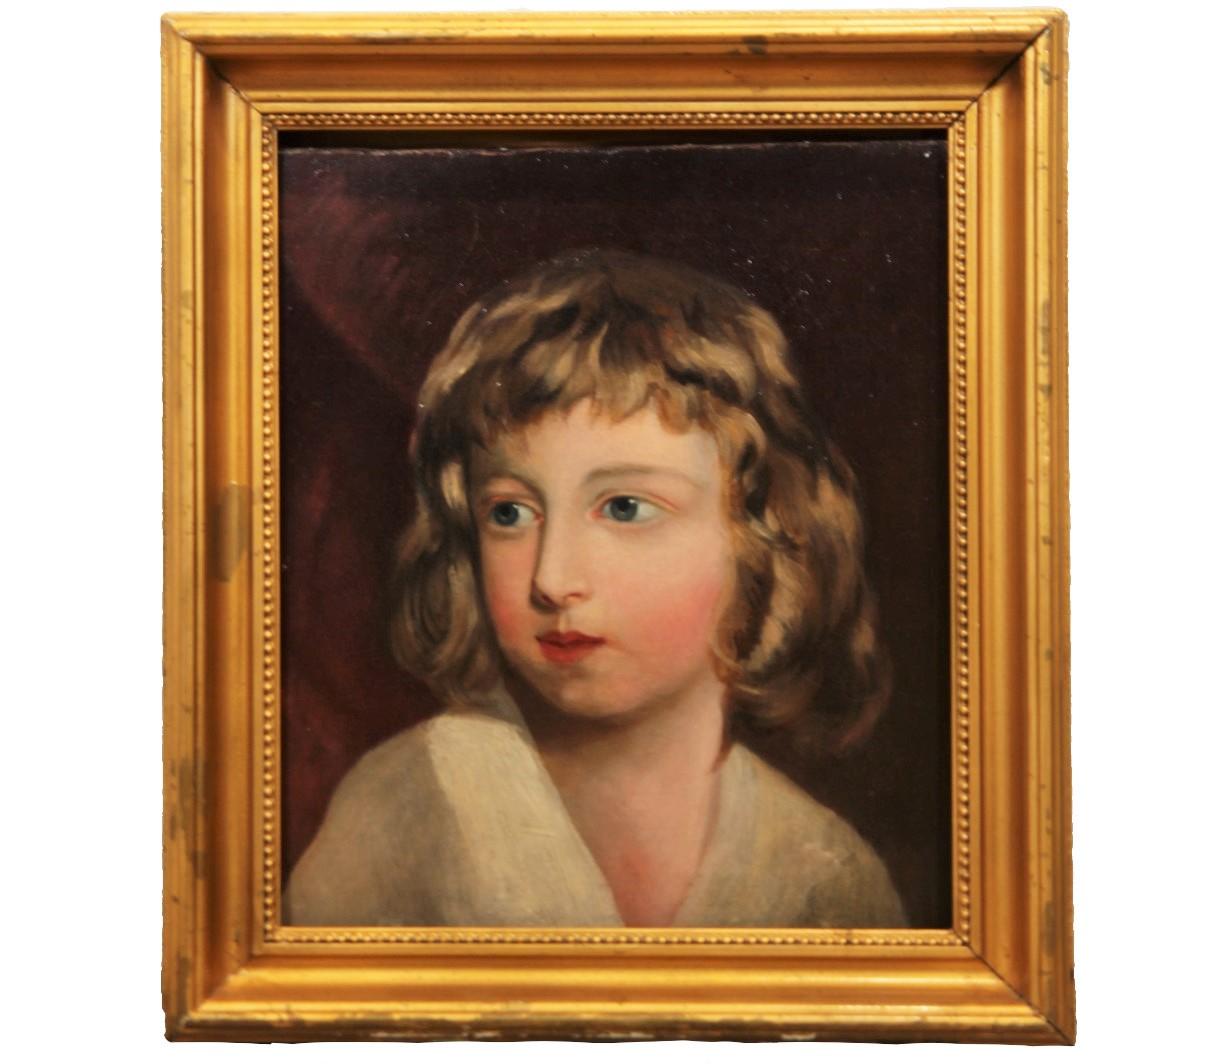 (In the Style of) John Hoppner Figurative Painting - 19th Century Portrait of an Upper British Boy